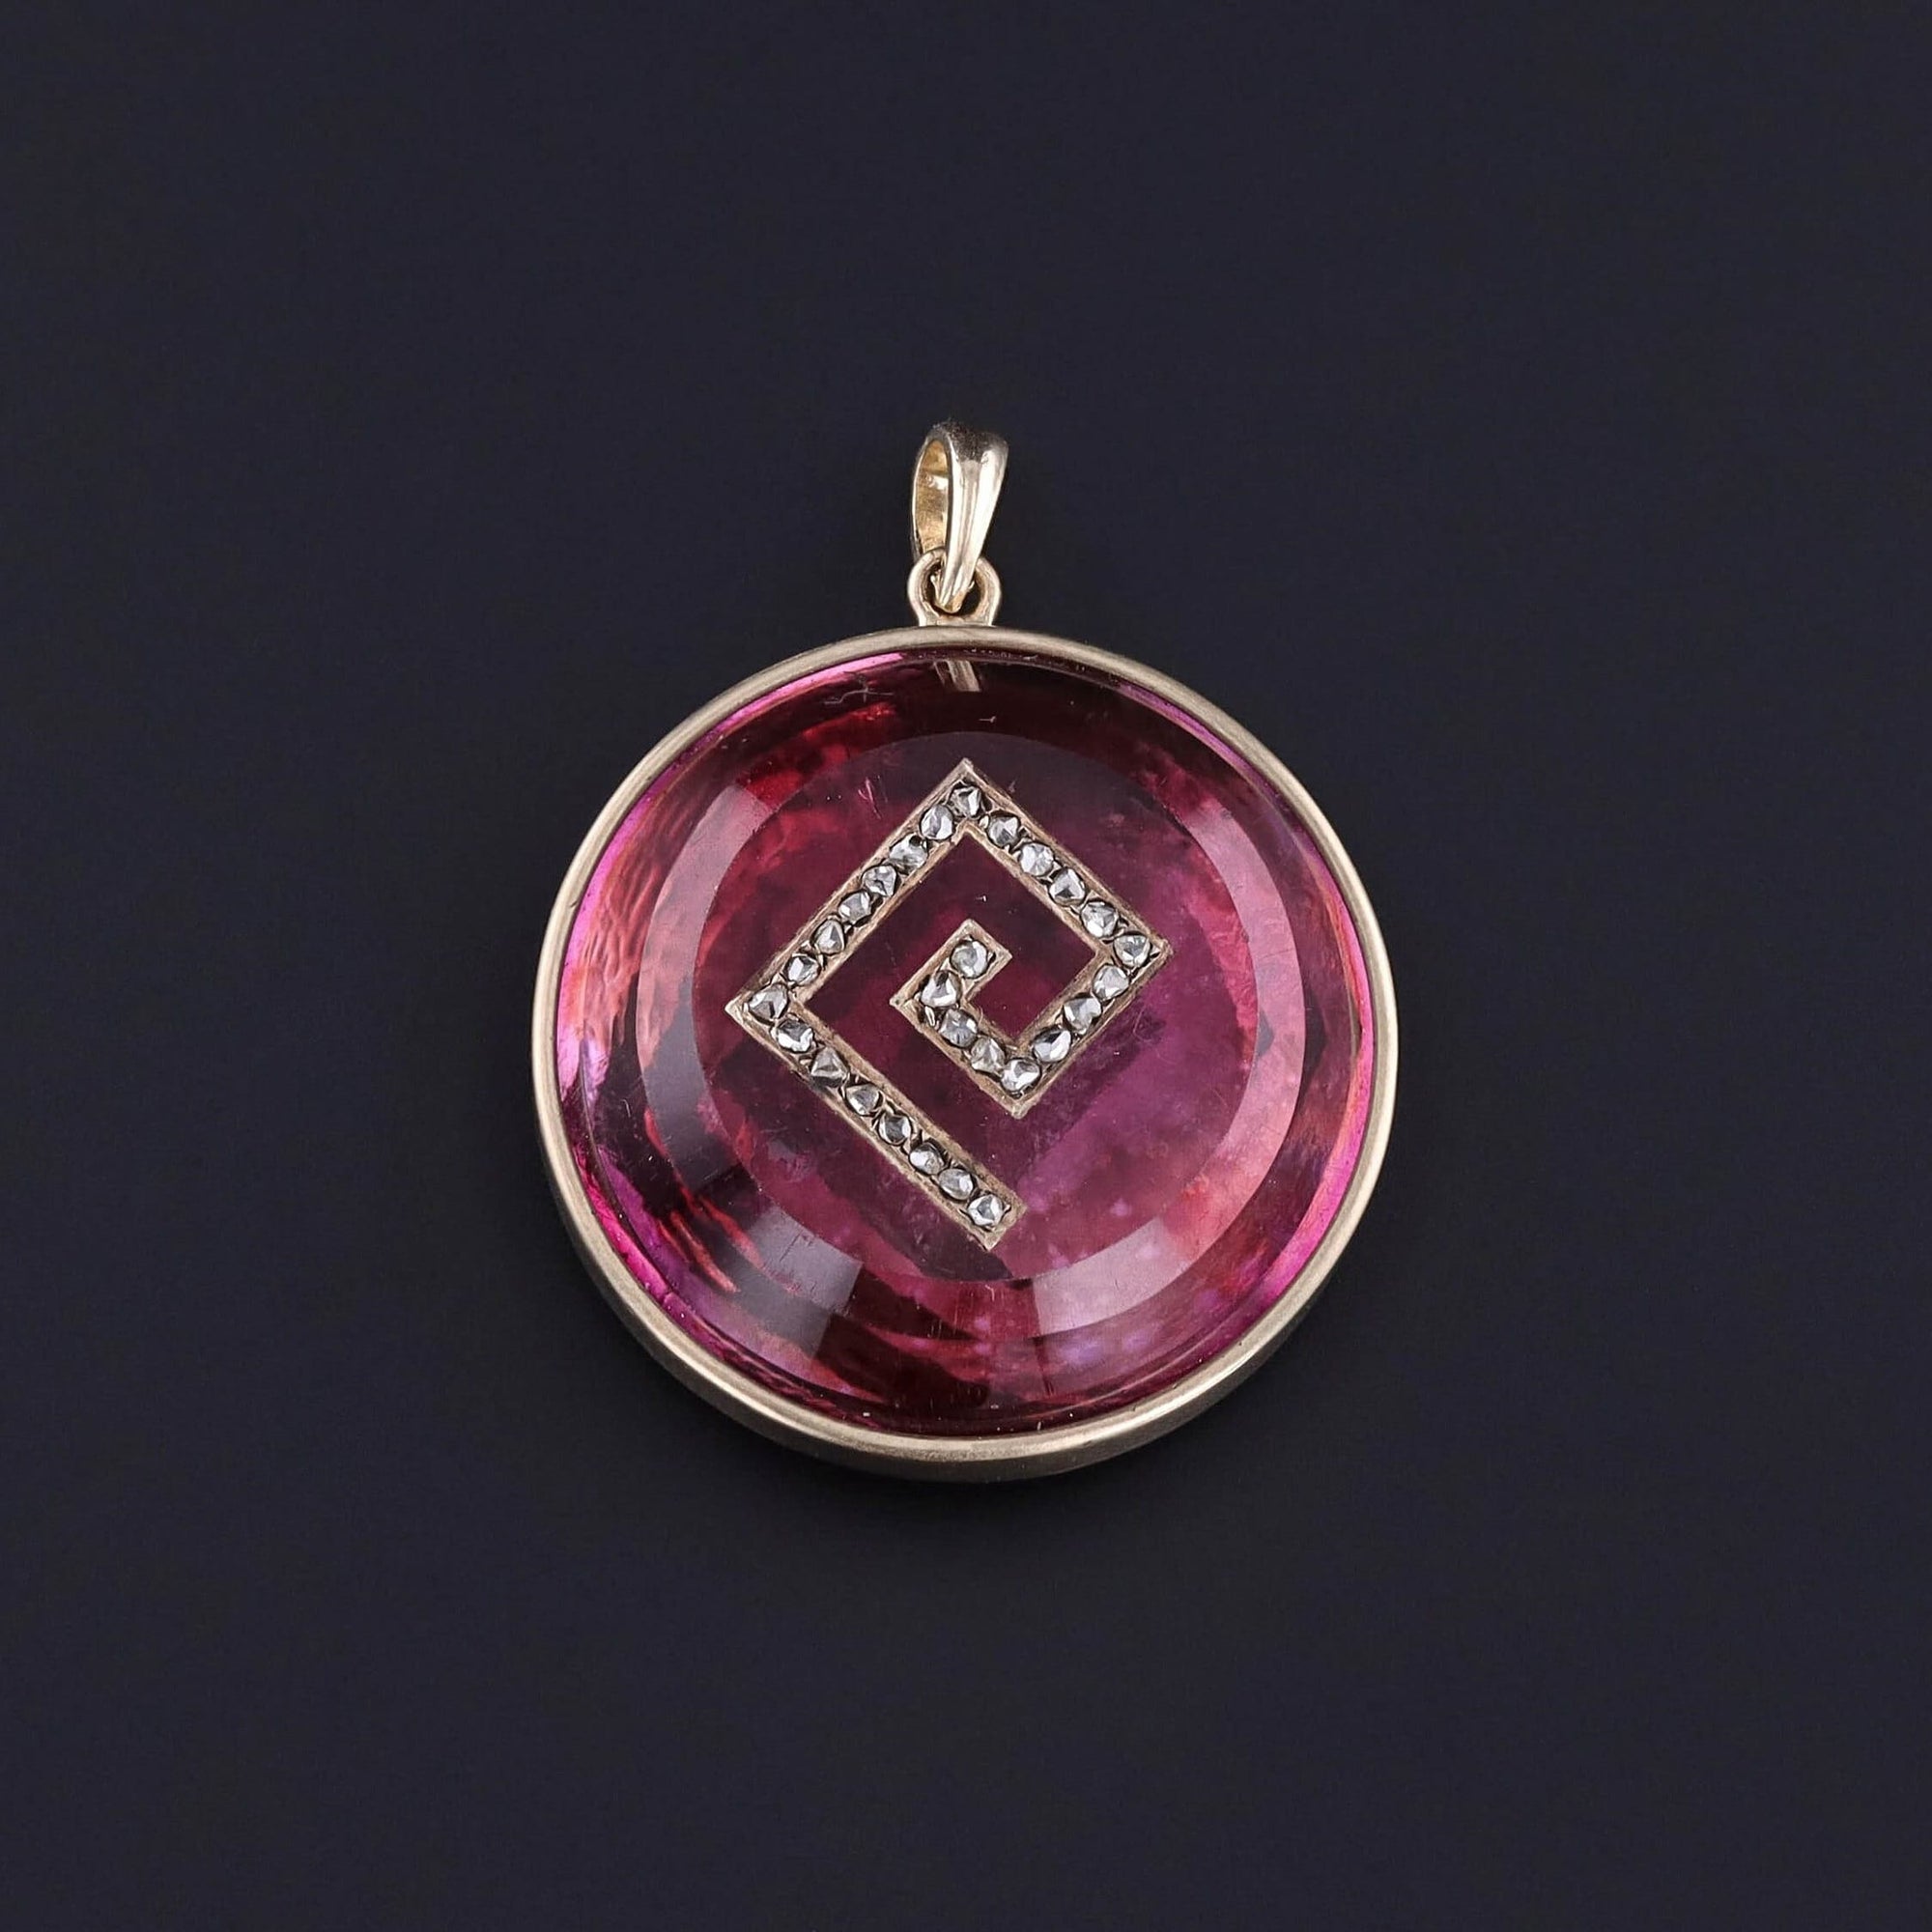 Antique Pink Rock Crystal & Diamond Pendant: Step into the past with this captivating antique 14k gold pendant showcasing a pink foil-backed rock crystal inlaid with a Greek key motif. The Greek key is adorned with rose cut diamonds.